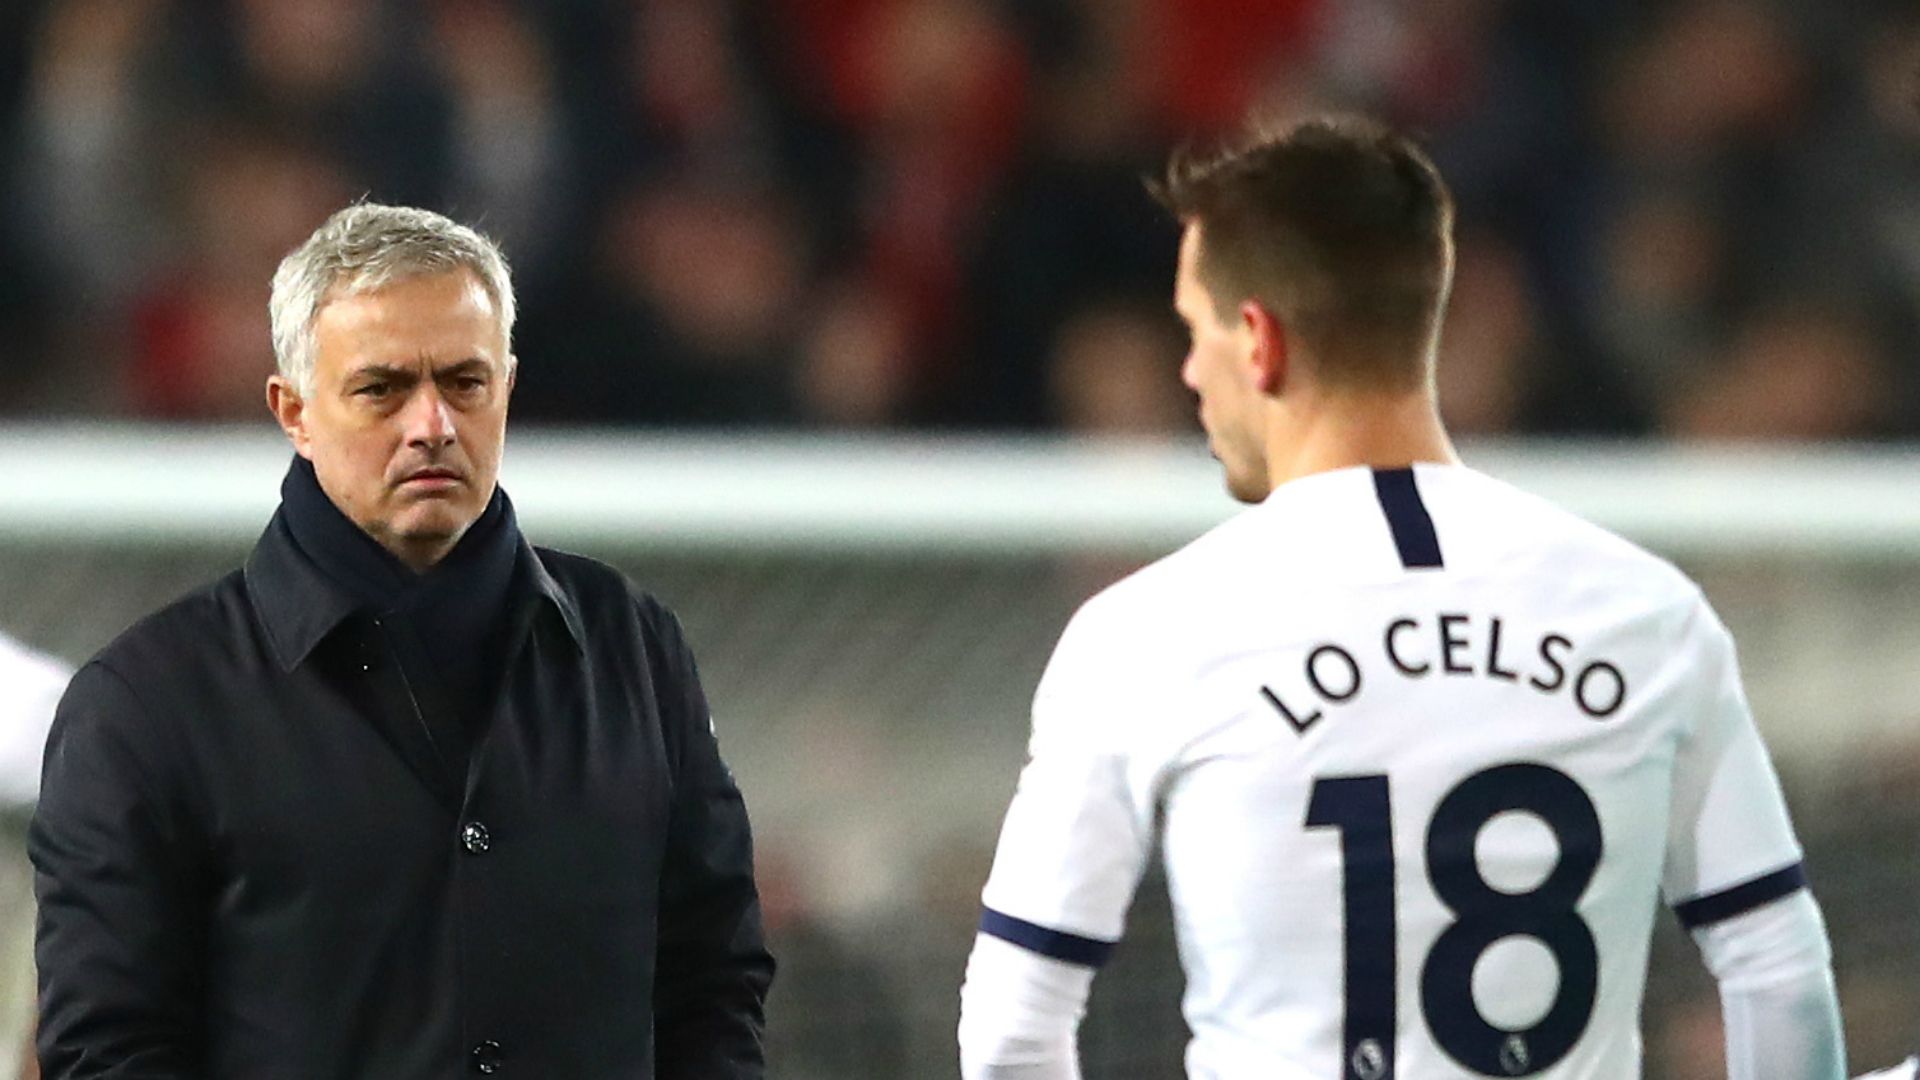 Spurs Express Tottenham's rebuild under Jose Mourinho has Giovani Lo Celso at the forefront